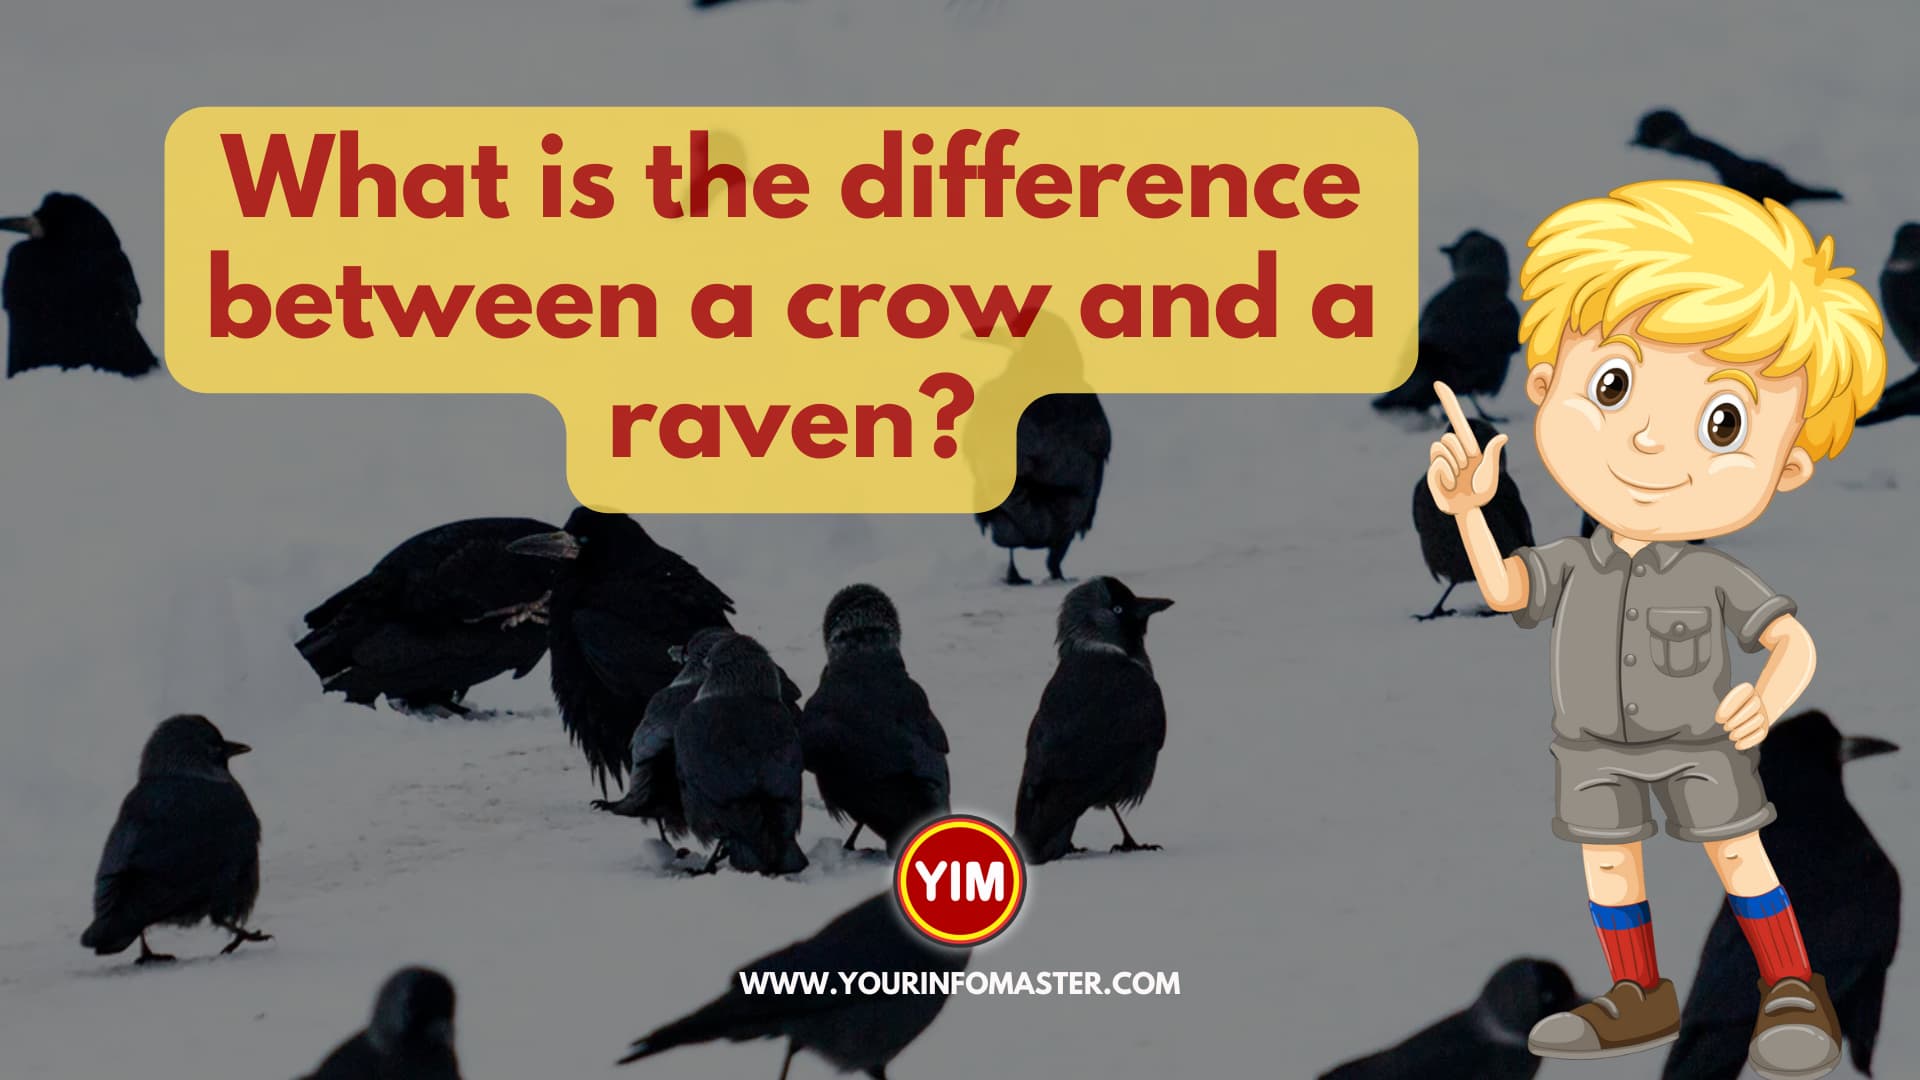 What is the difference between a crow and a raven?